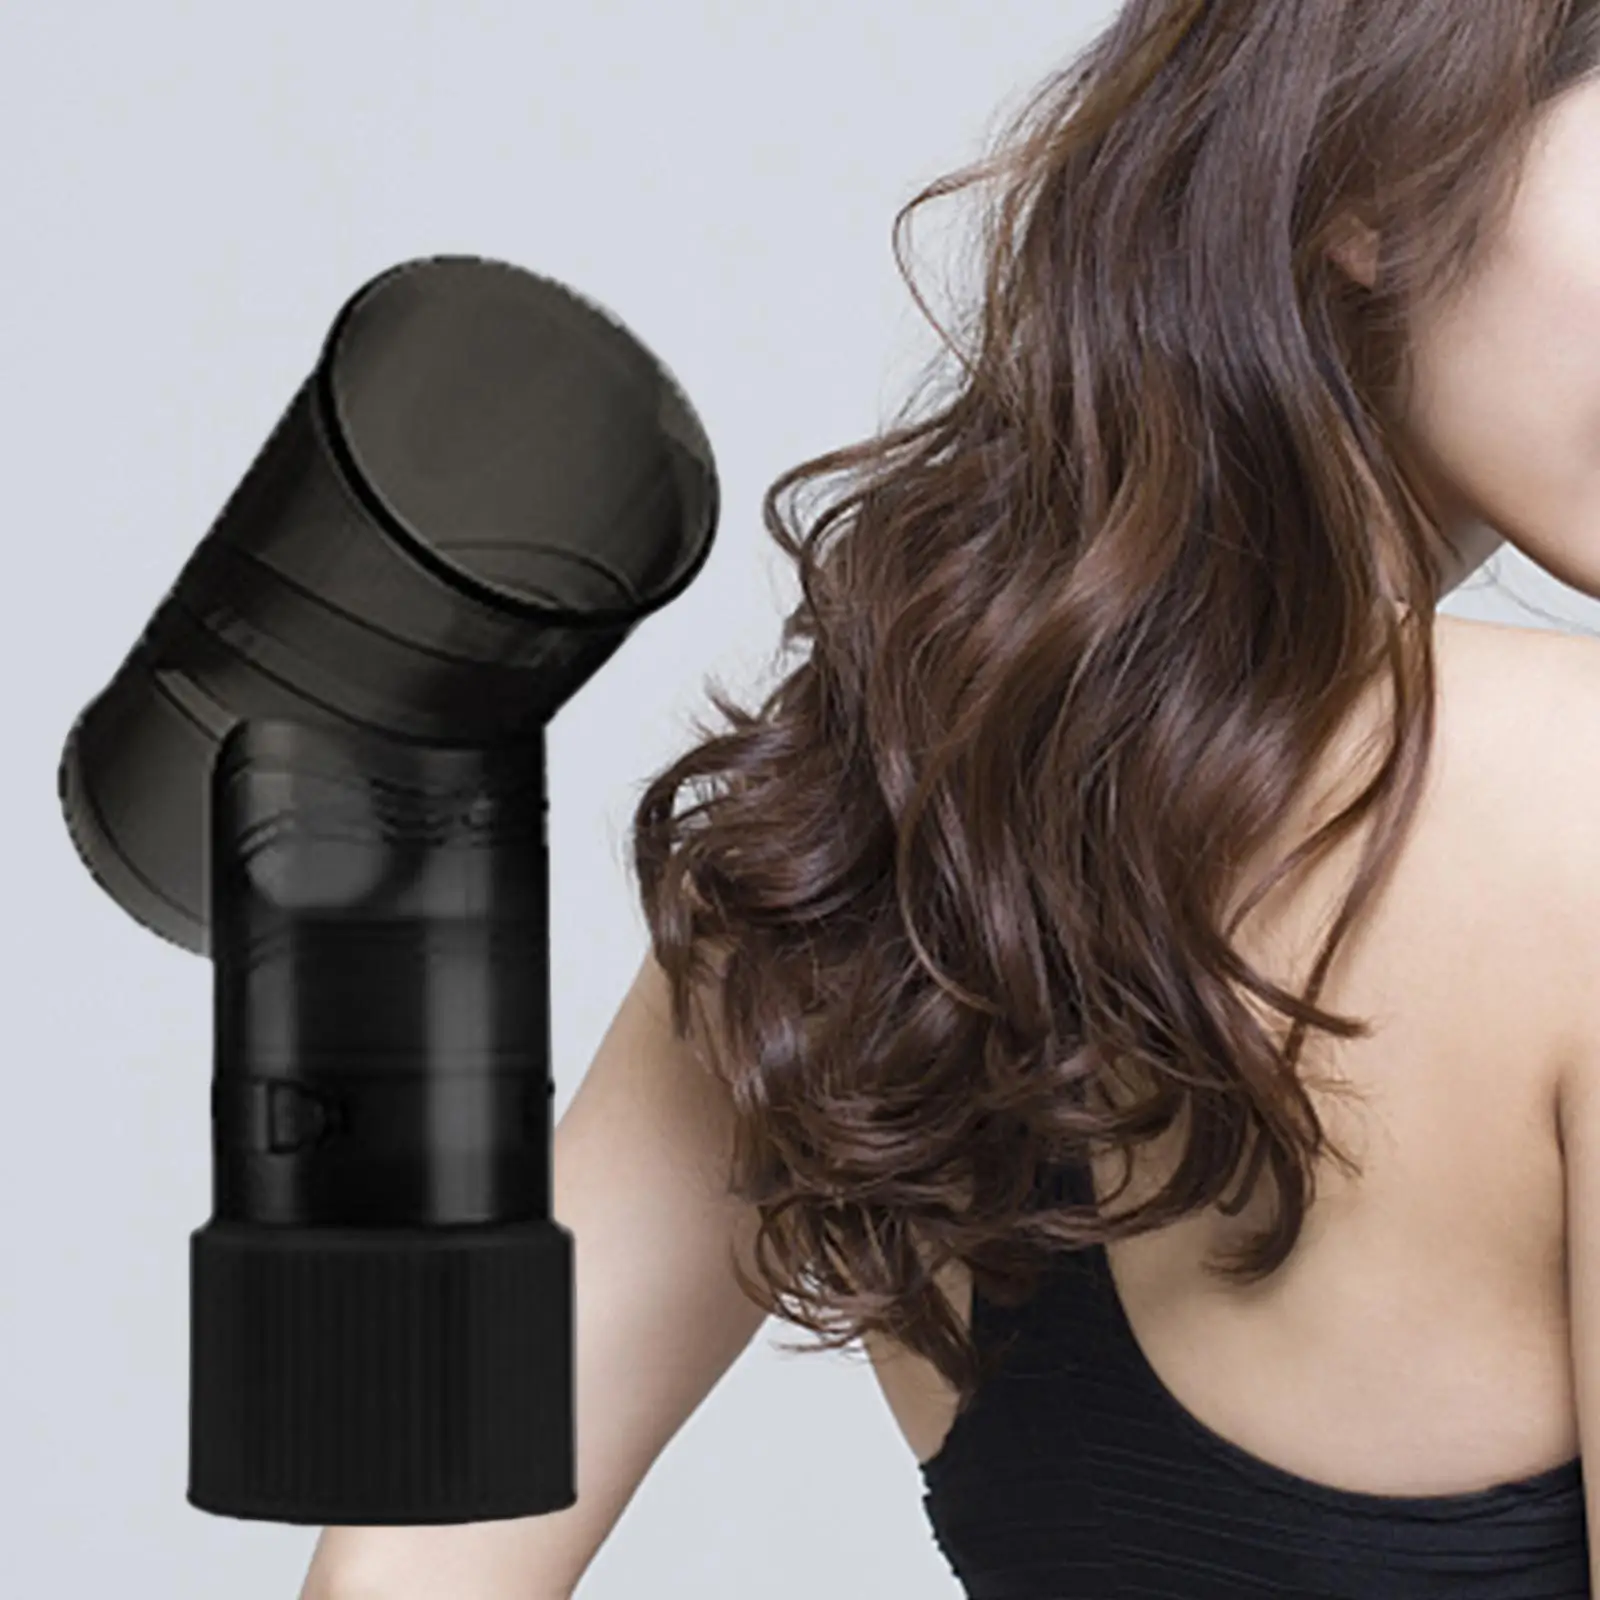 Hair Diffuser Wind Hair Dryer Parts Accessories Heat Resistant Material Suitable for Salon or Home Use Easy to Operate